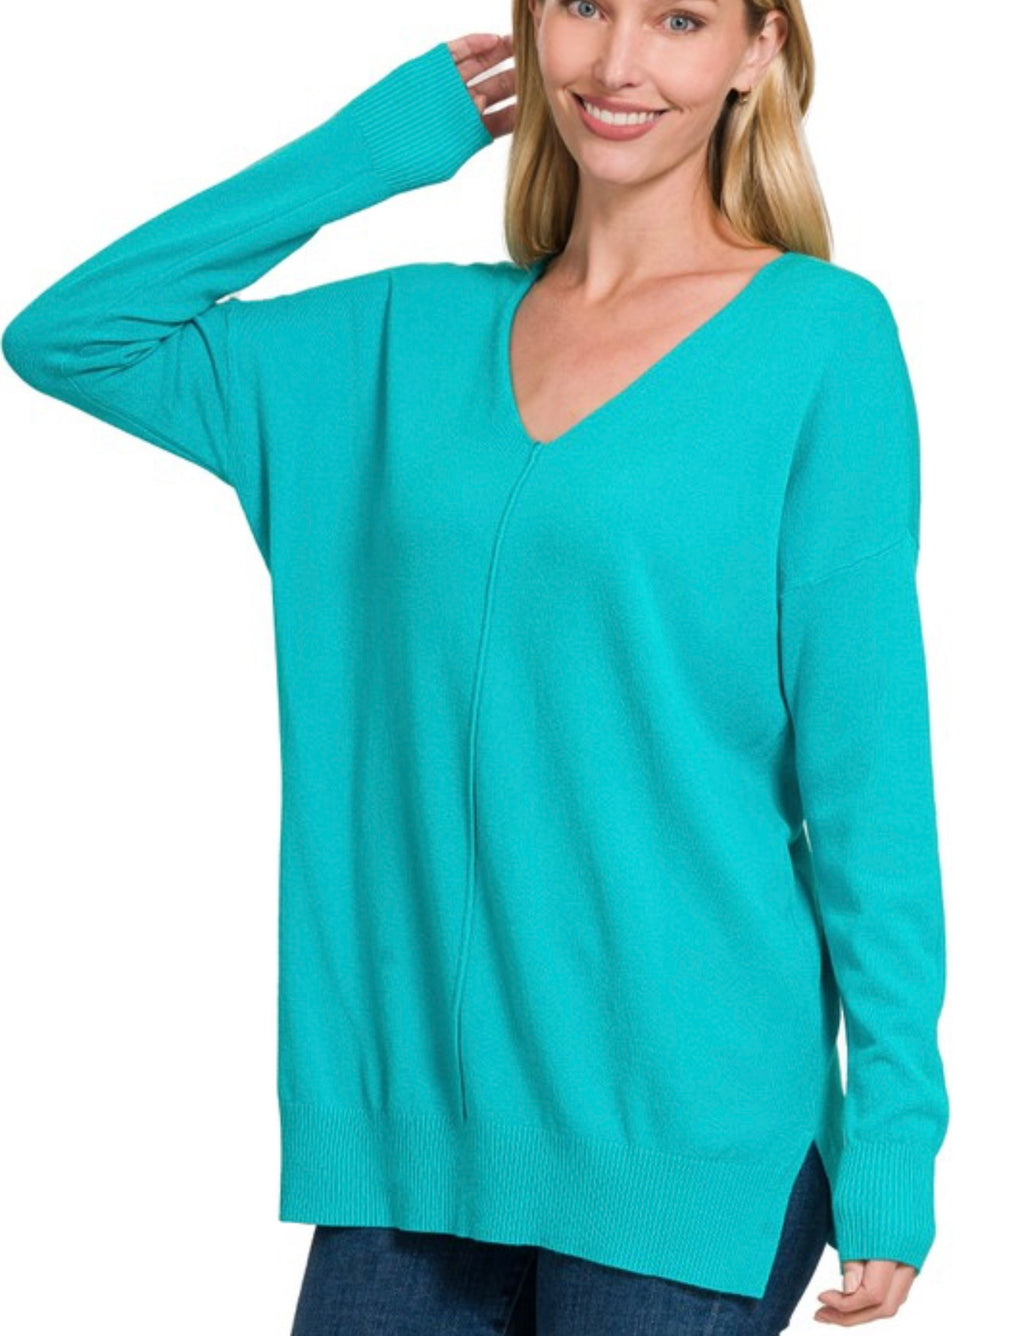 The Magic Sweater - Turquoise